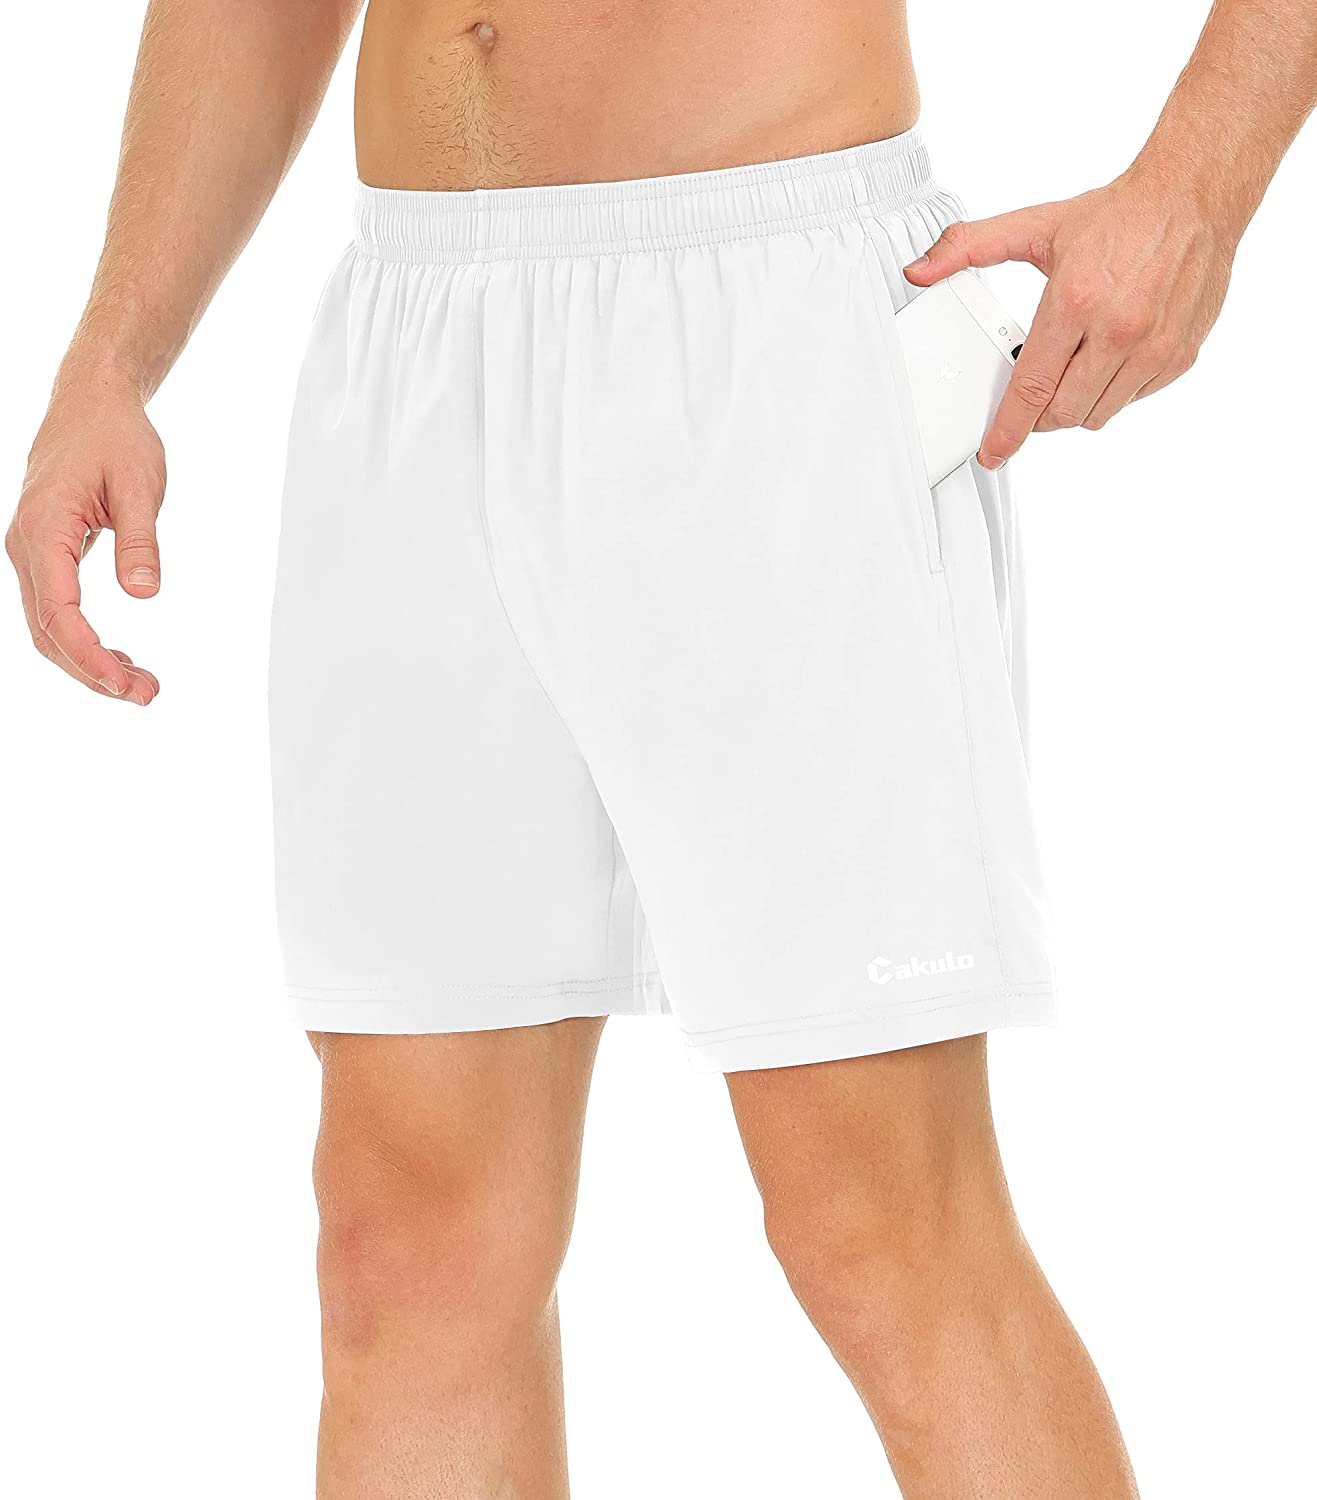 Cakulo Men's Running Shorts 5 Inch Lightweight Quick Dry Tennis Athletic Workout Shorts with Pockets 